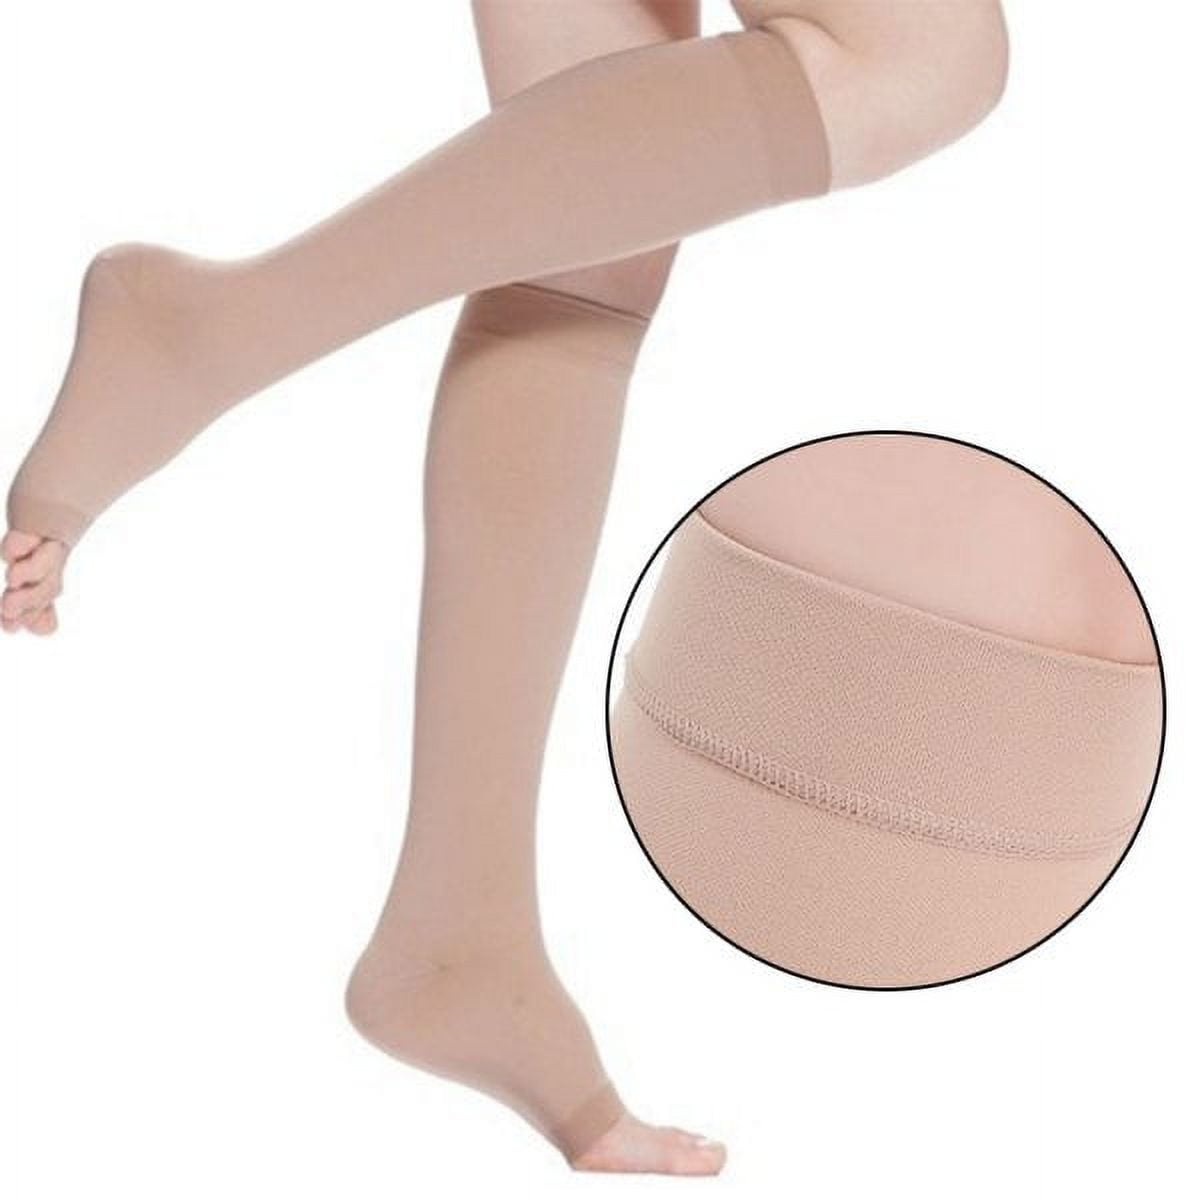 Medical Compression Socks with Open Toe - Best Support Zipper